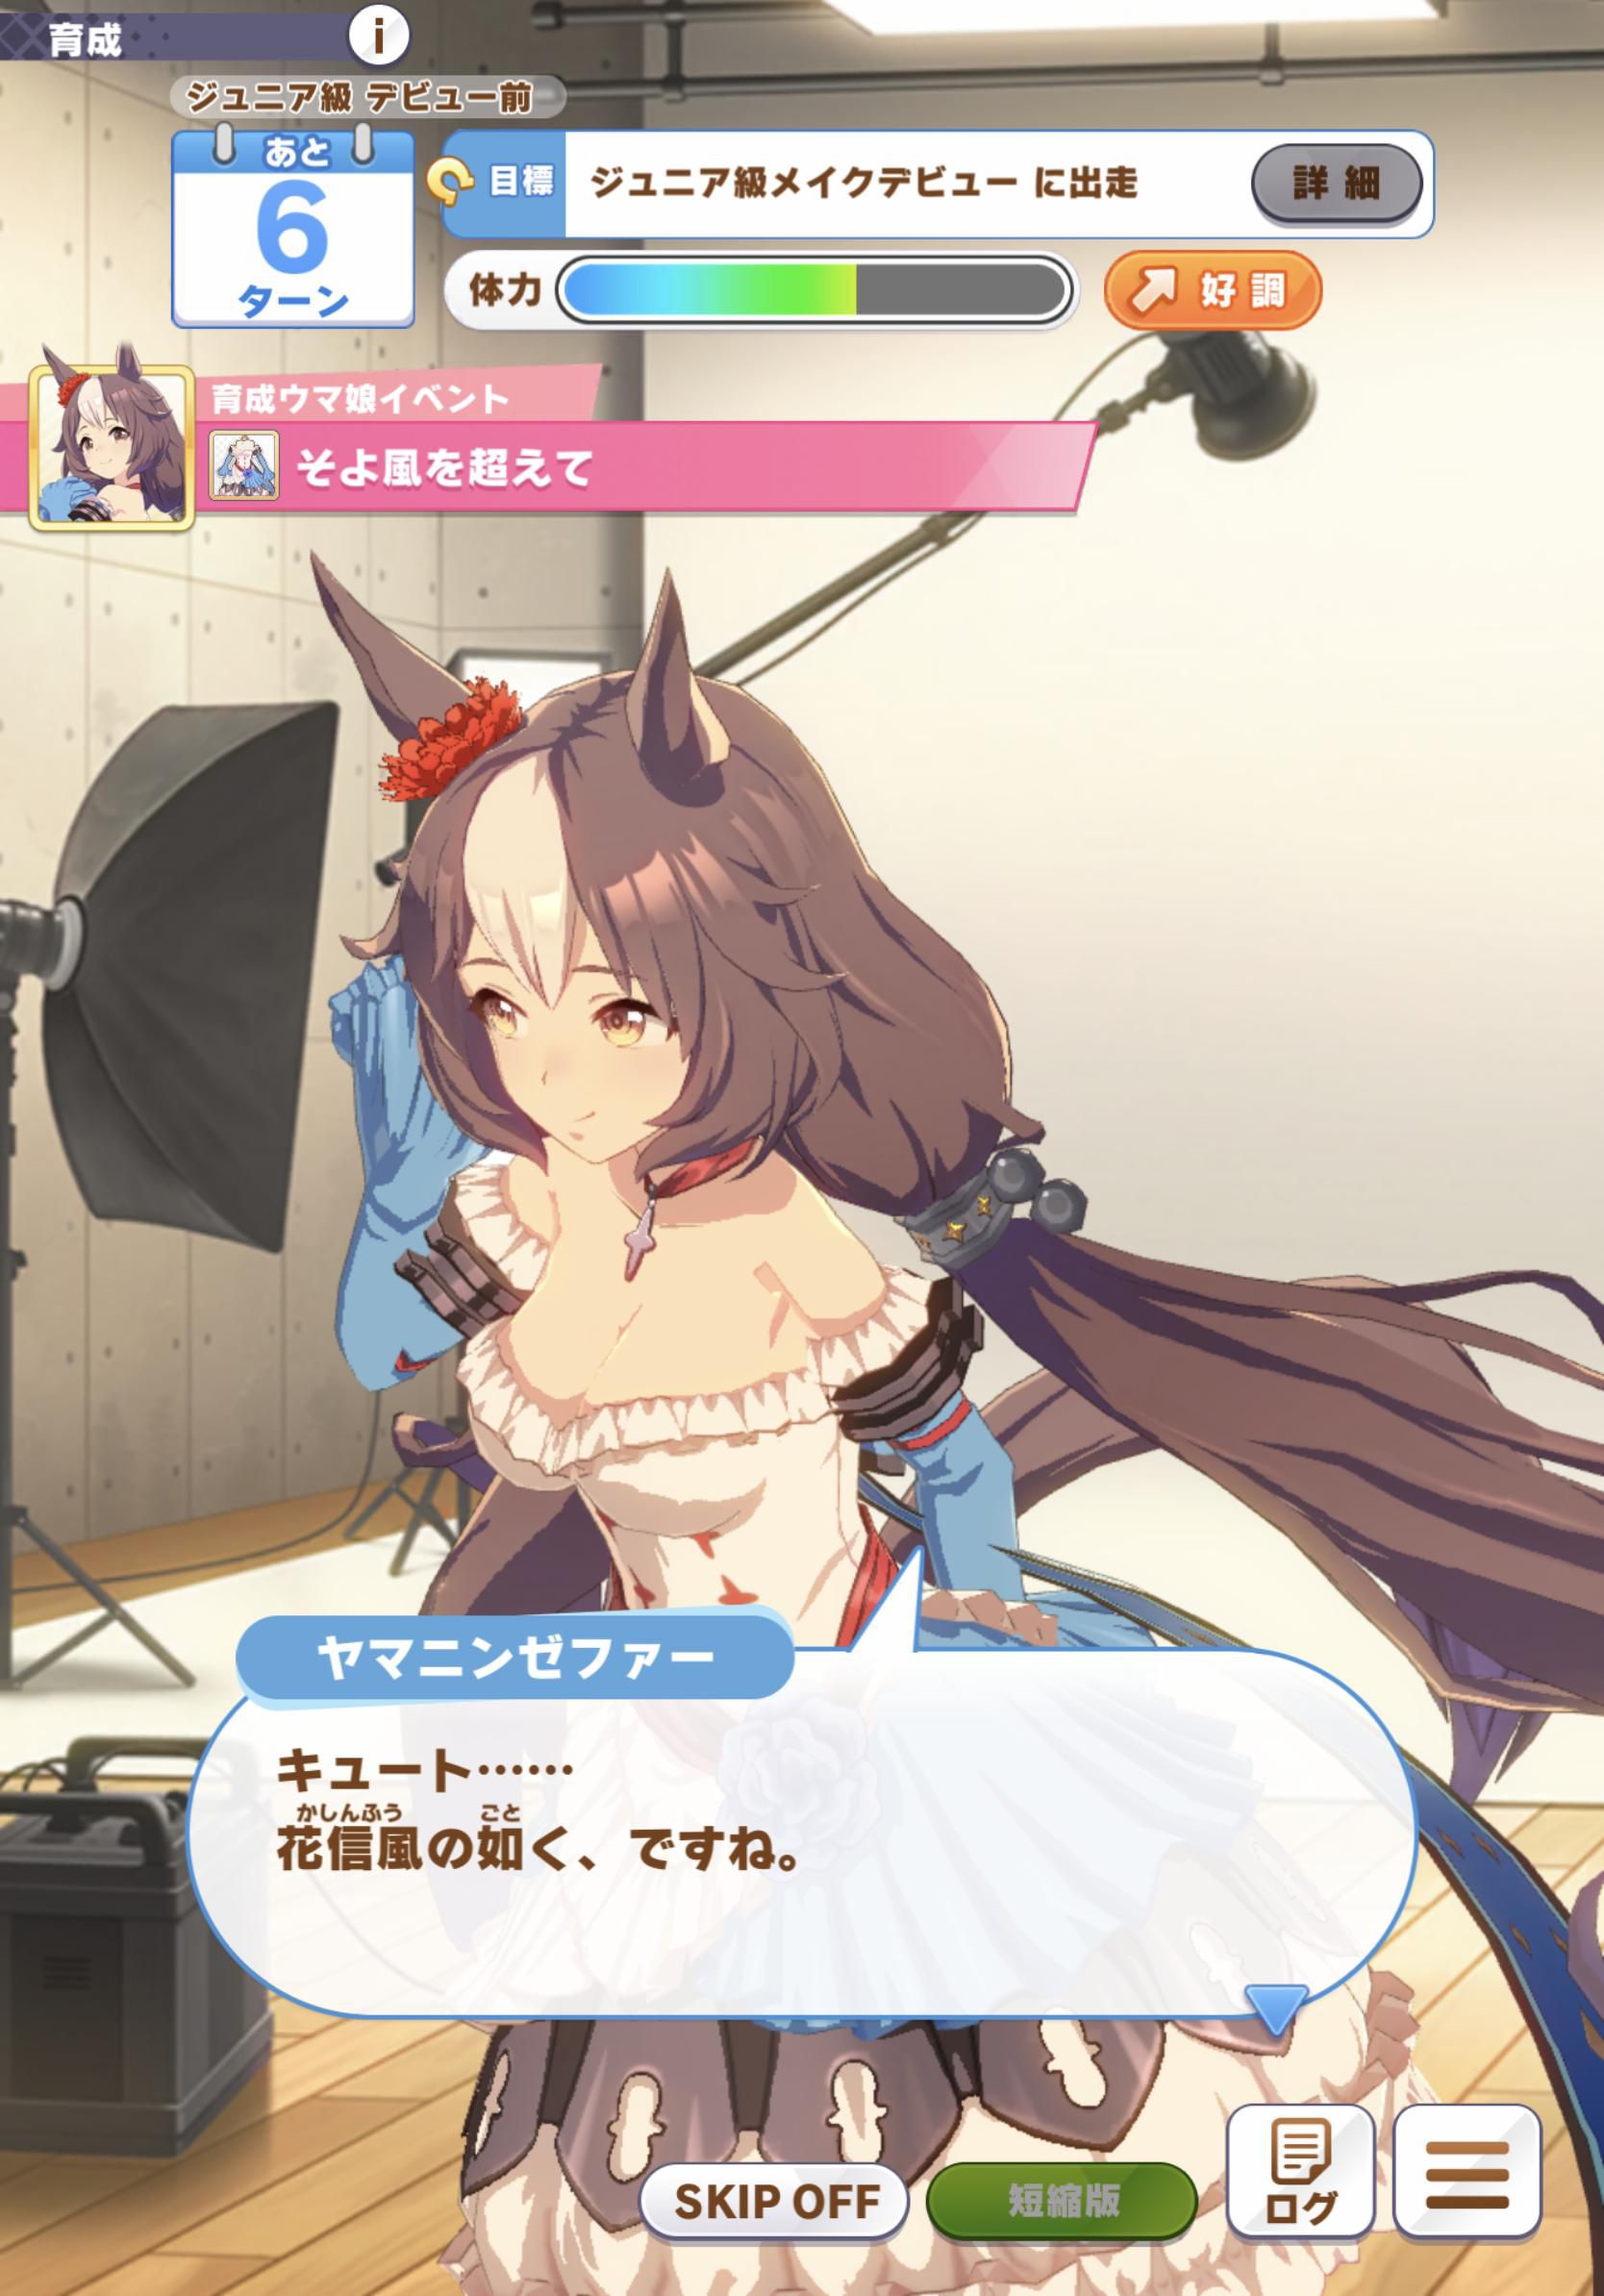 【Image】Uma Musume will implement a new character with the most erotic costume ever 2